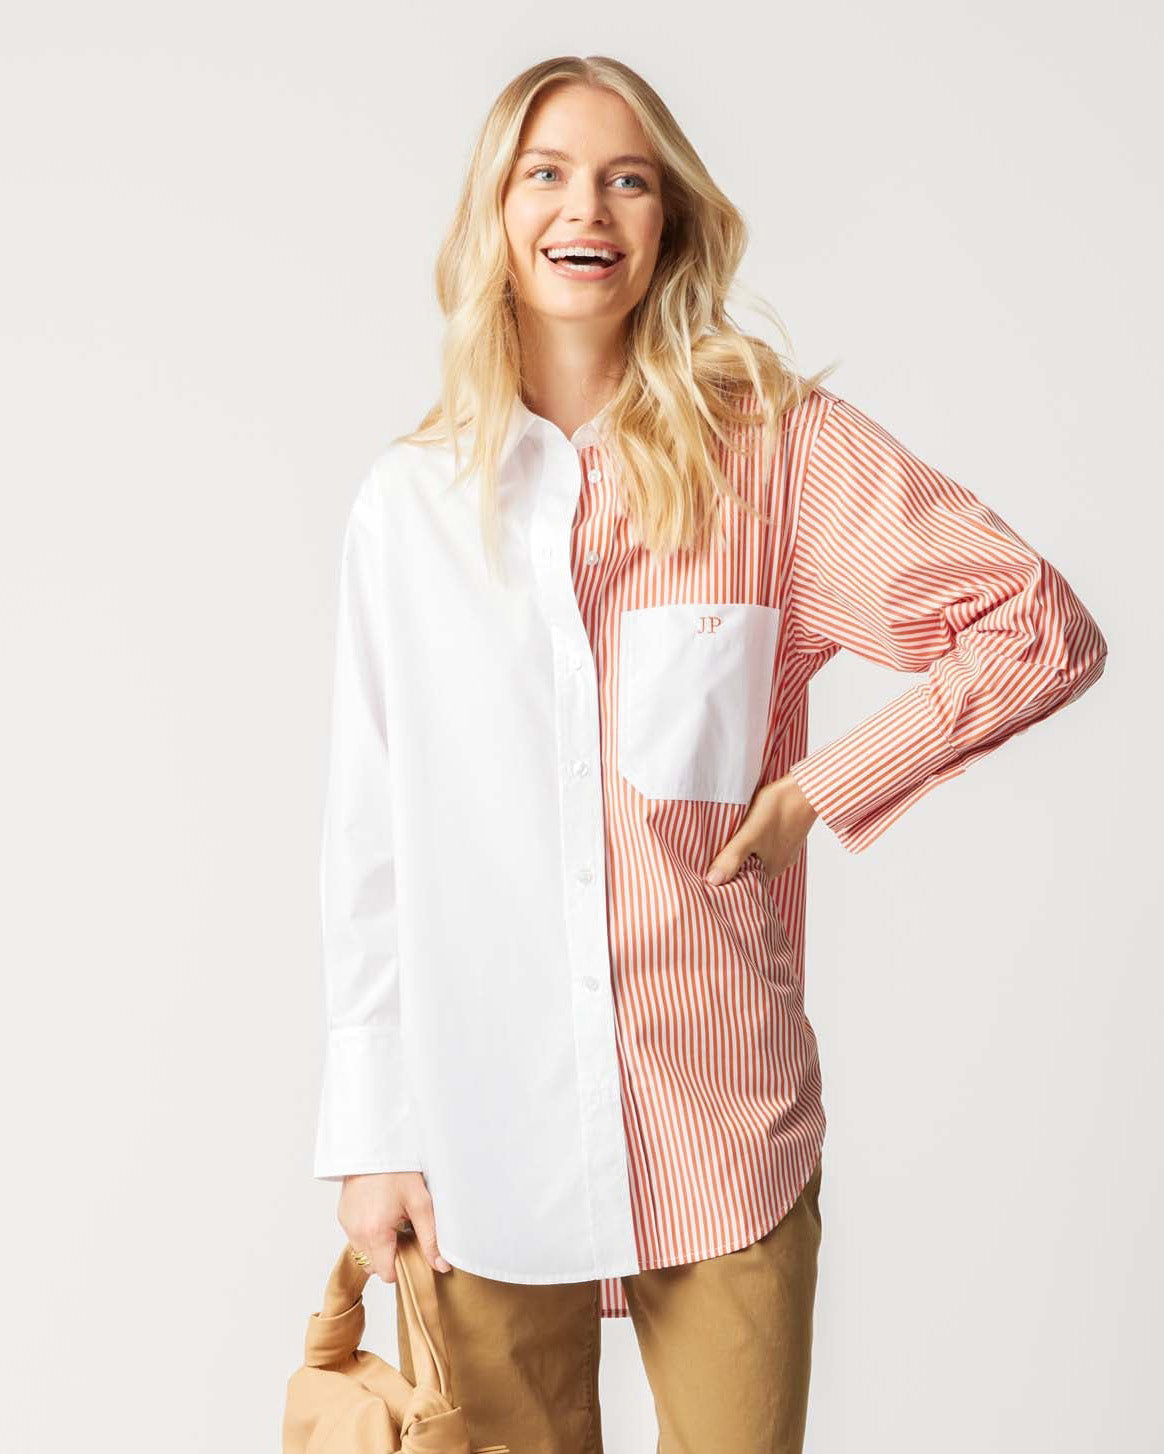 The Brooklyn Button Down Top Katie Kime